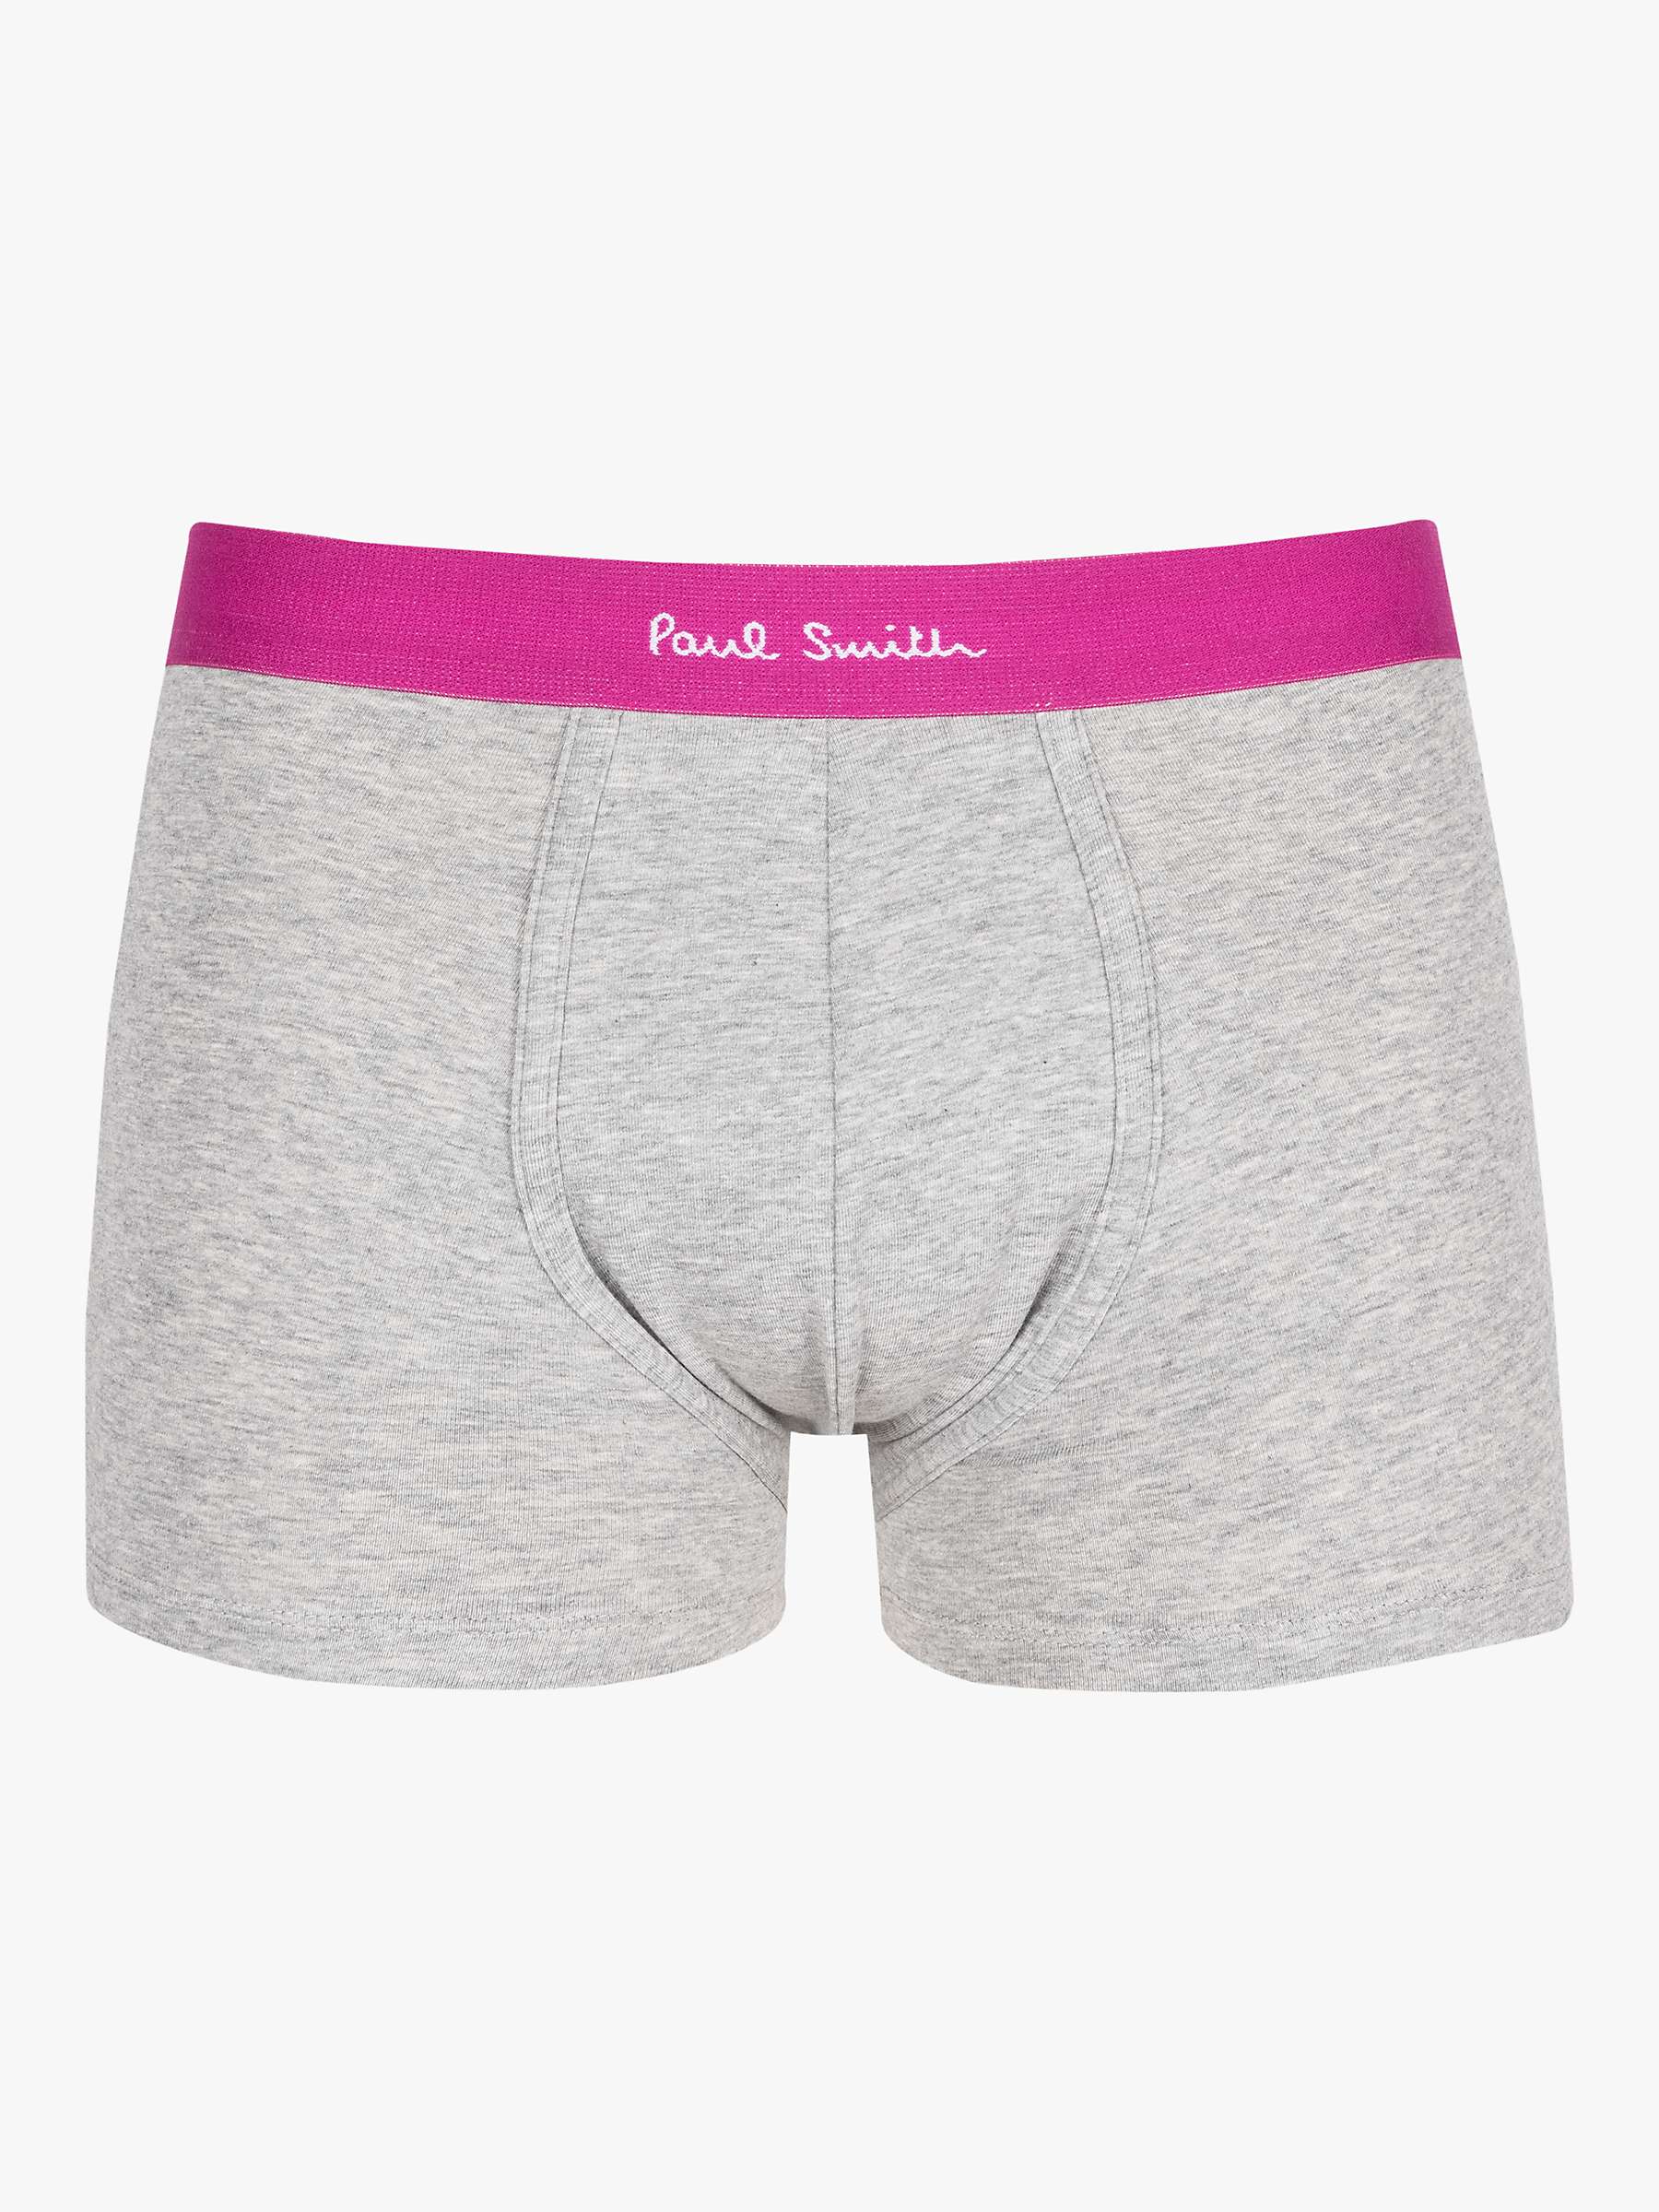 Paul Smith Cotton Stretch Trunks, Pack of 3, White/Grey/Black at John ...